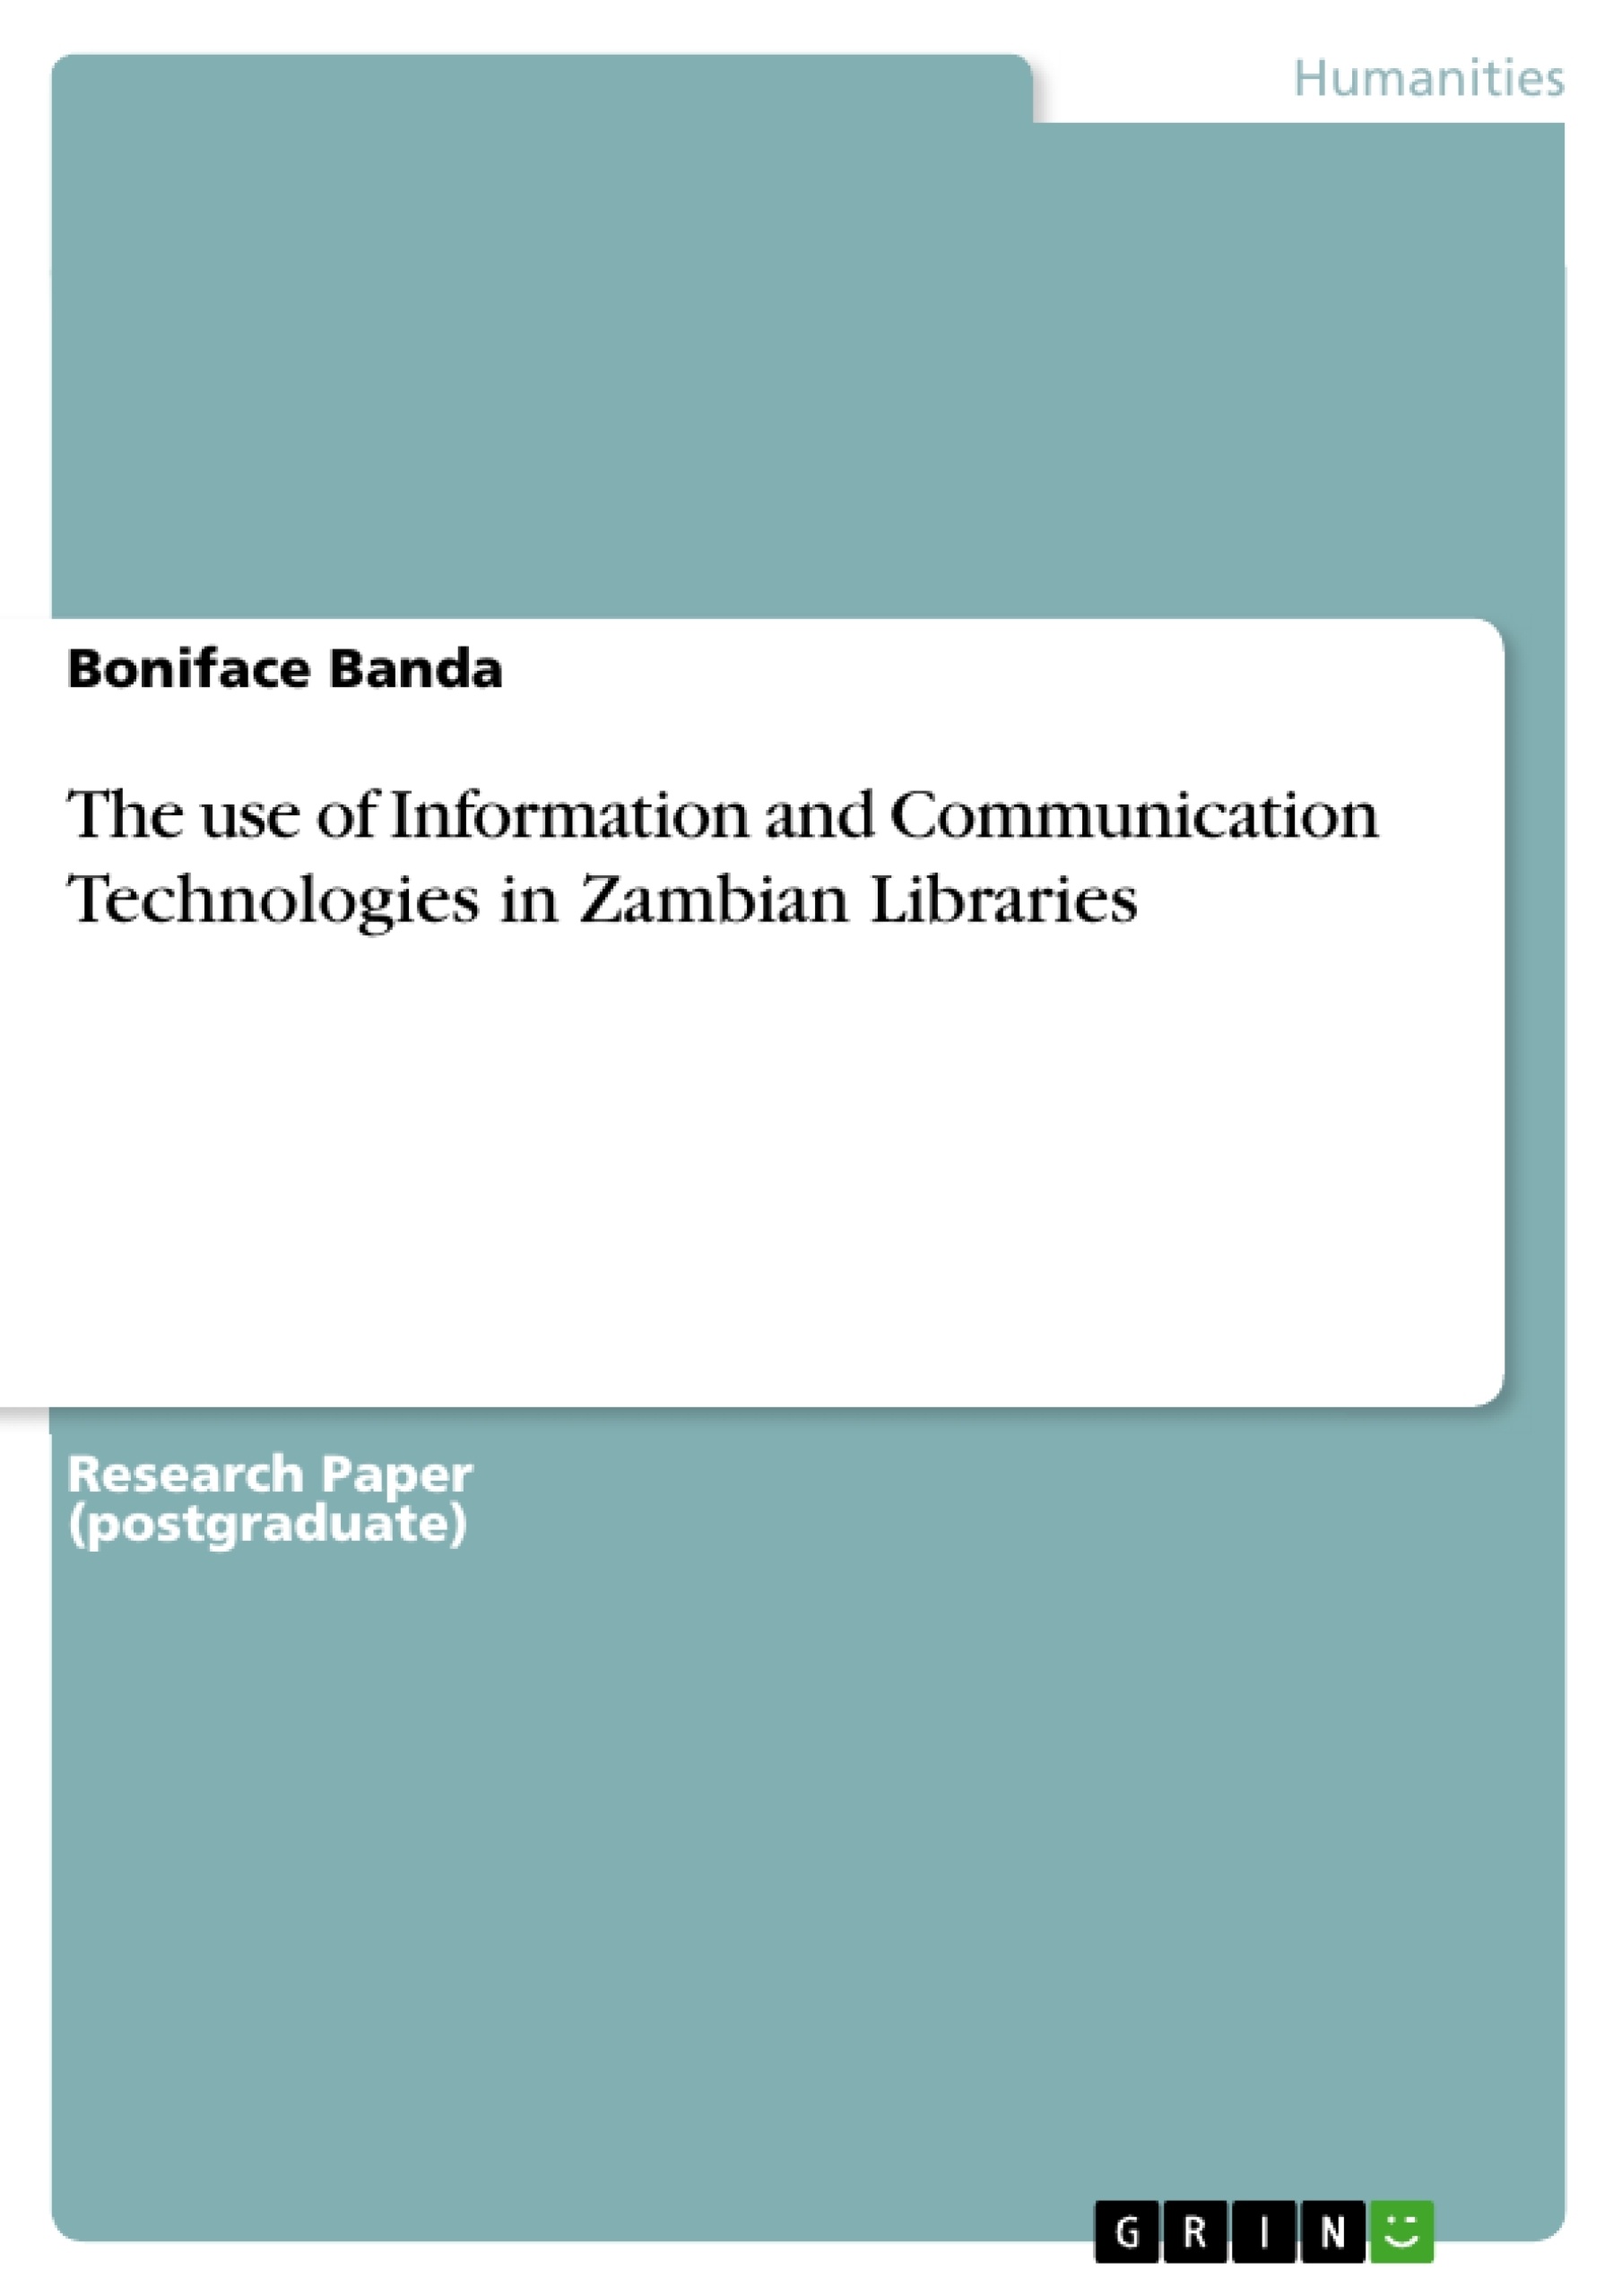 Title: The use of Information and Communication Technologies in Zambian Libraries